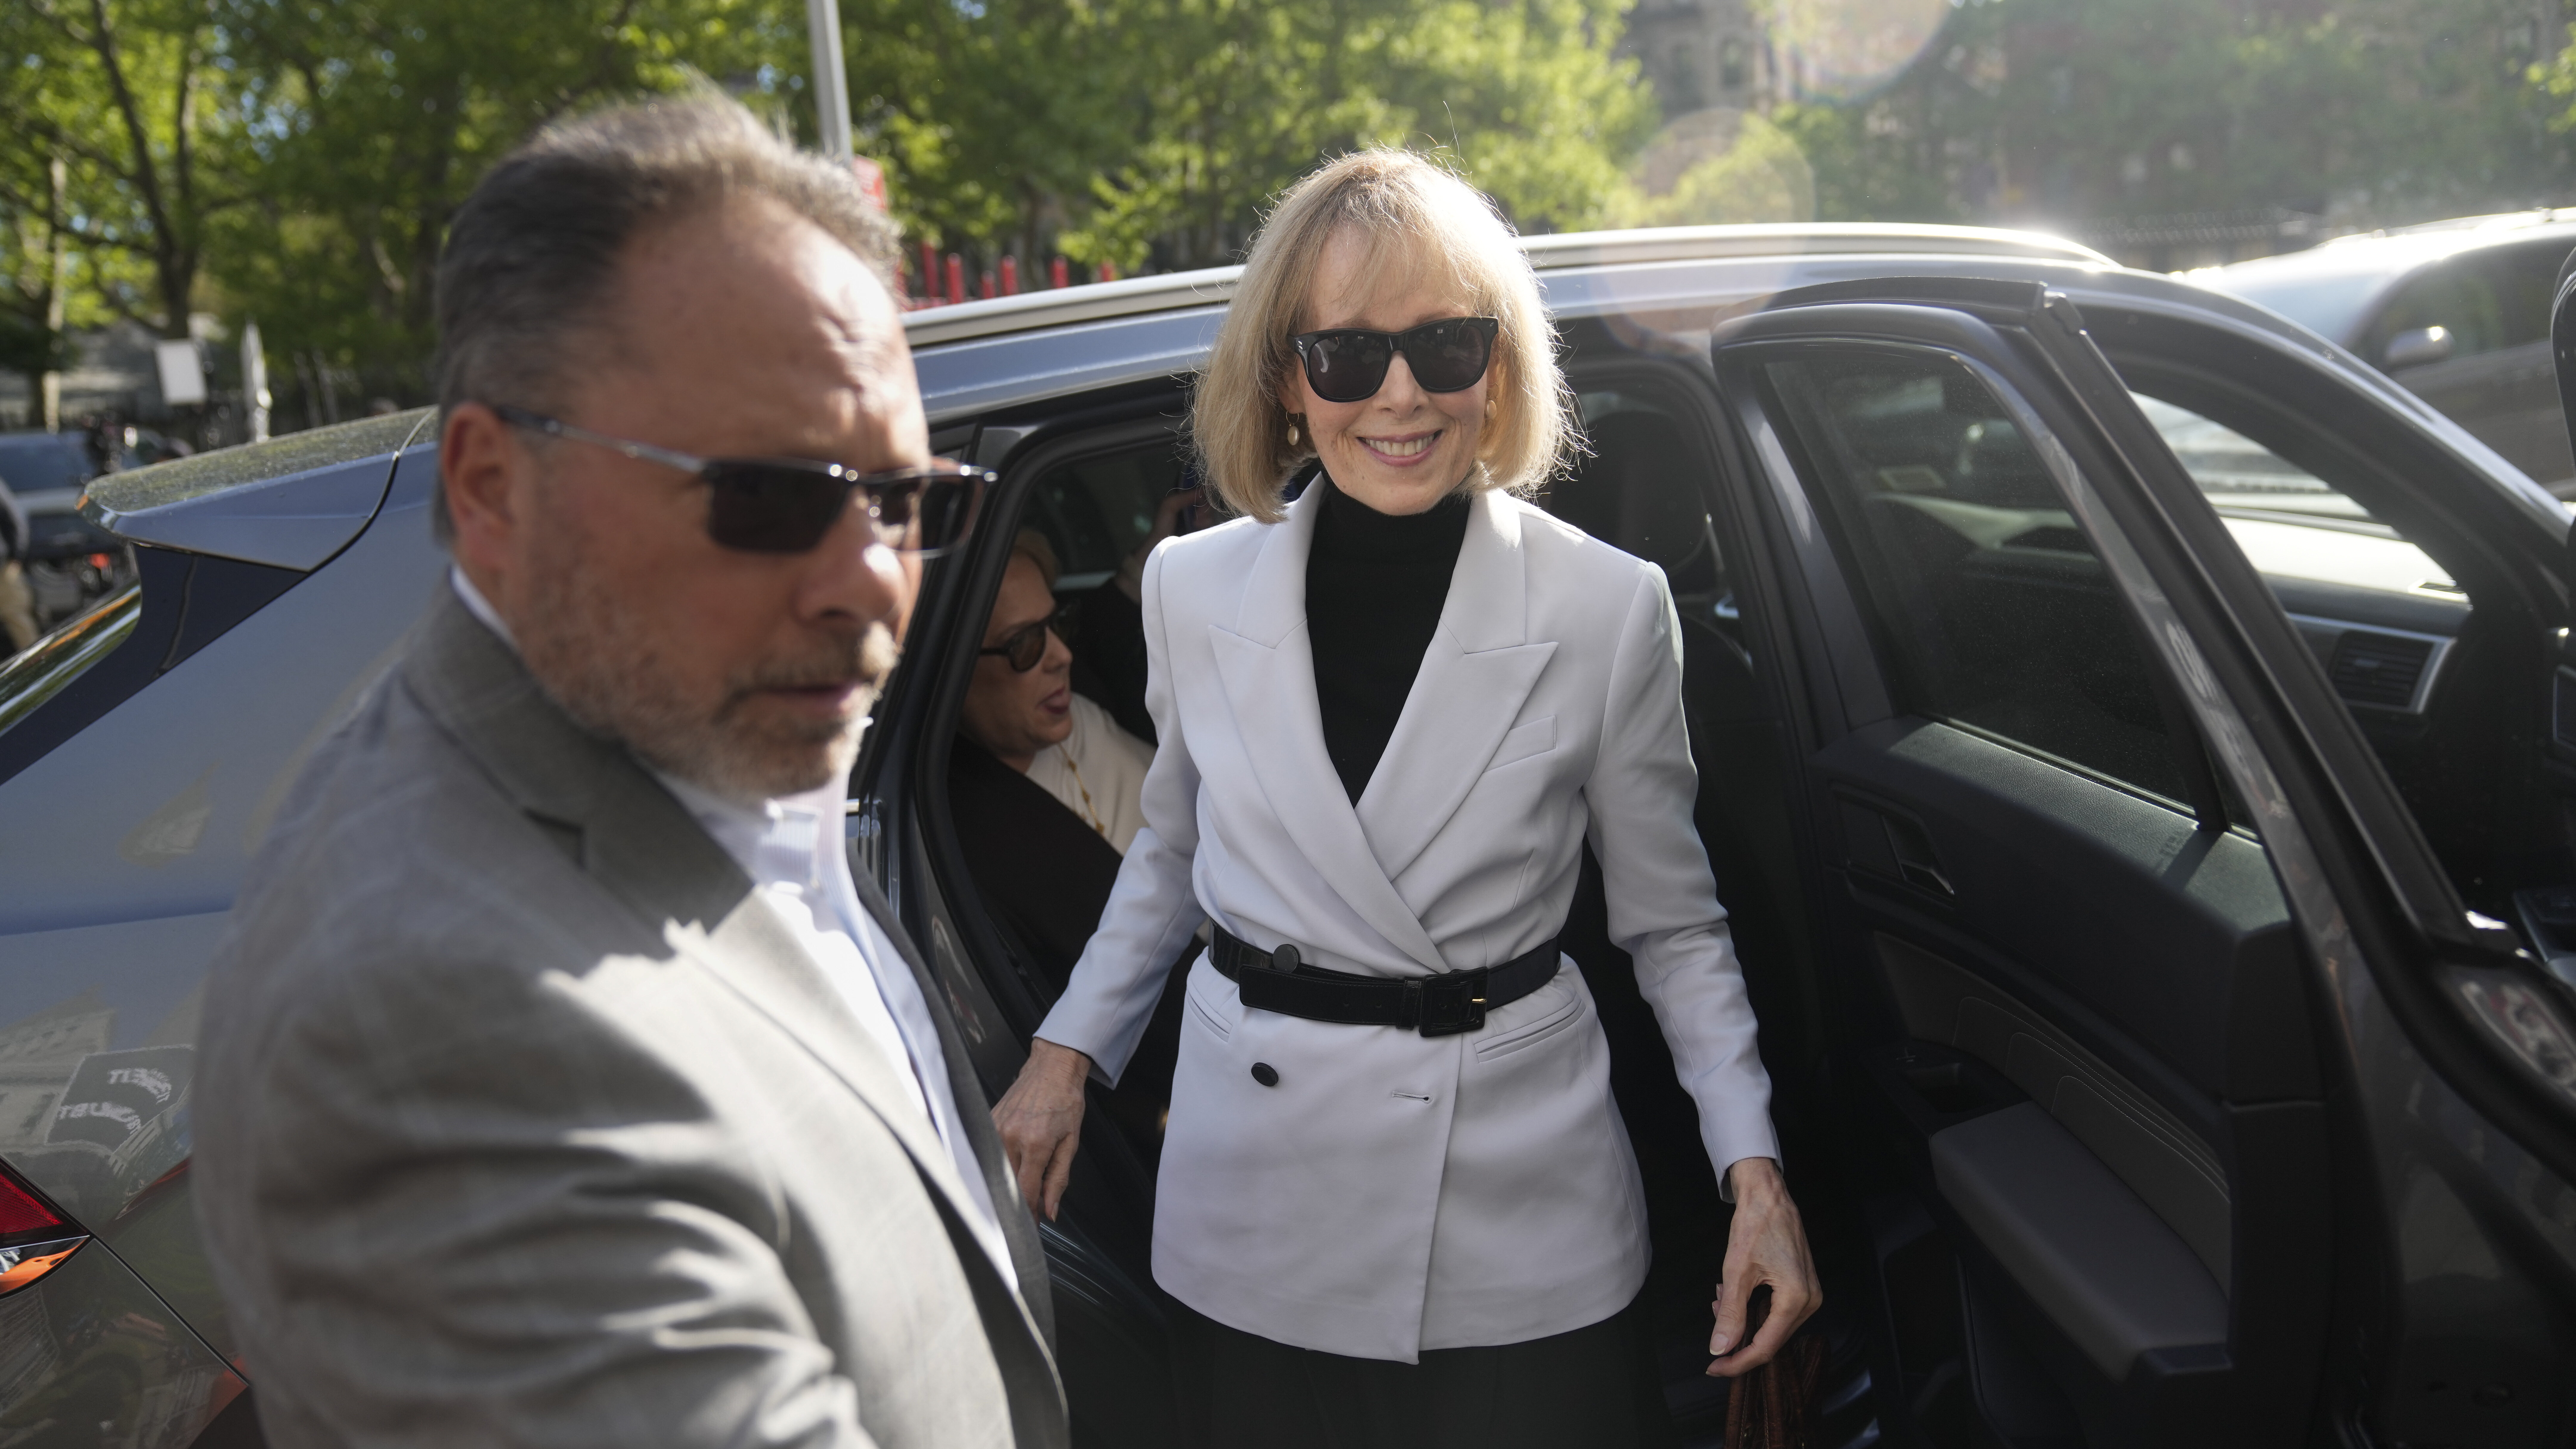 E. Jean Carroll pictured, a jury just awarded her millions in a lawsuit against former president do...